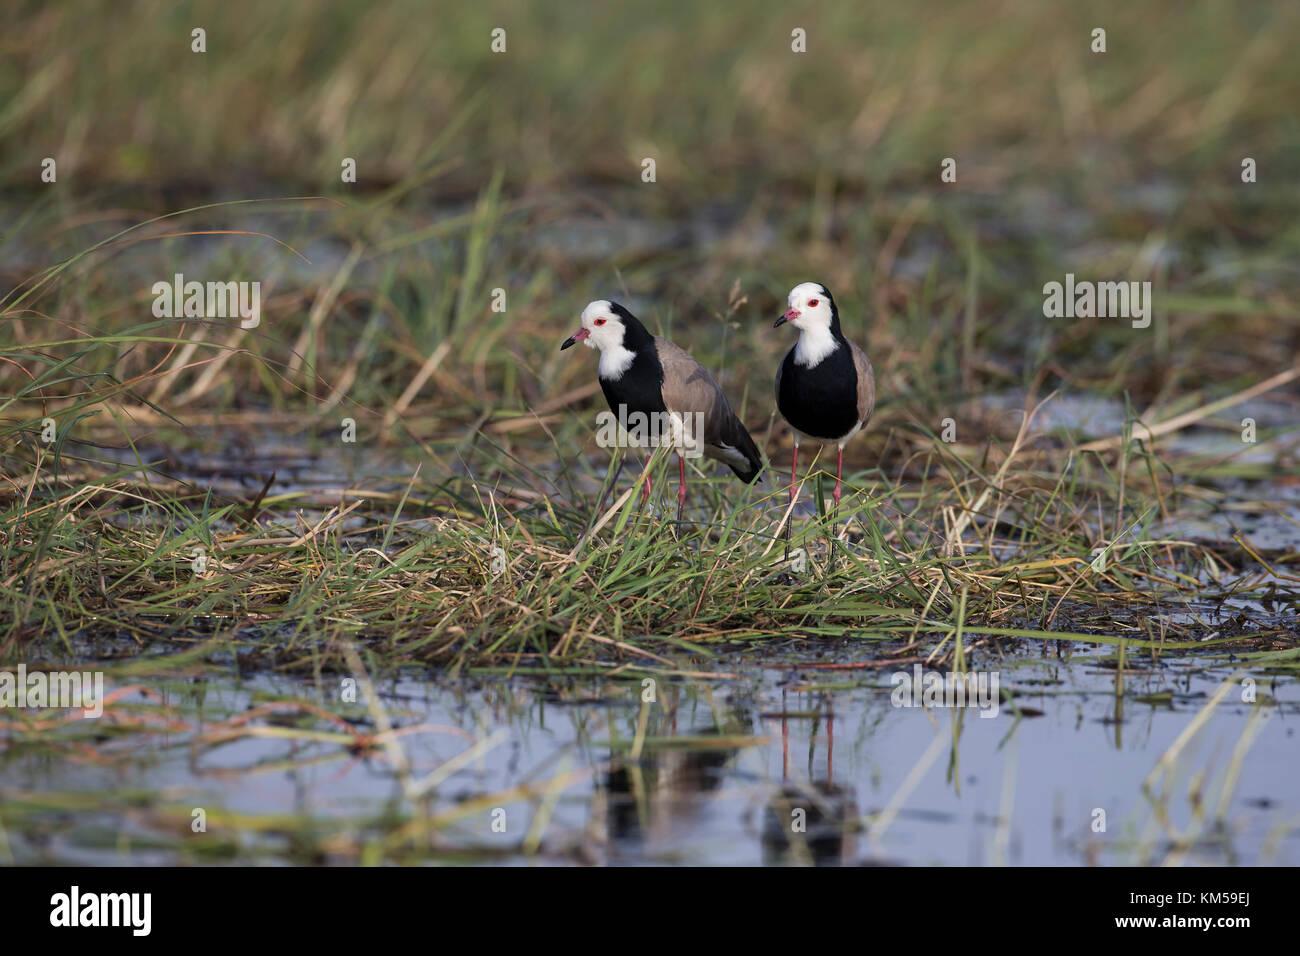 A pair of long-toed Lapwing Vanellus crassirostris standing on wetland alongside the Chobe river in Botswana Stock Photo